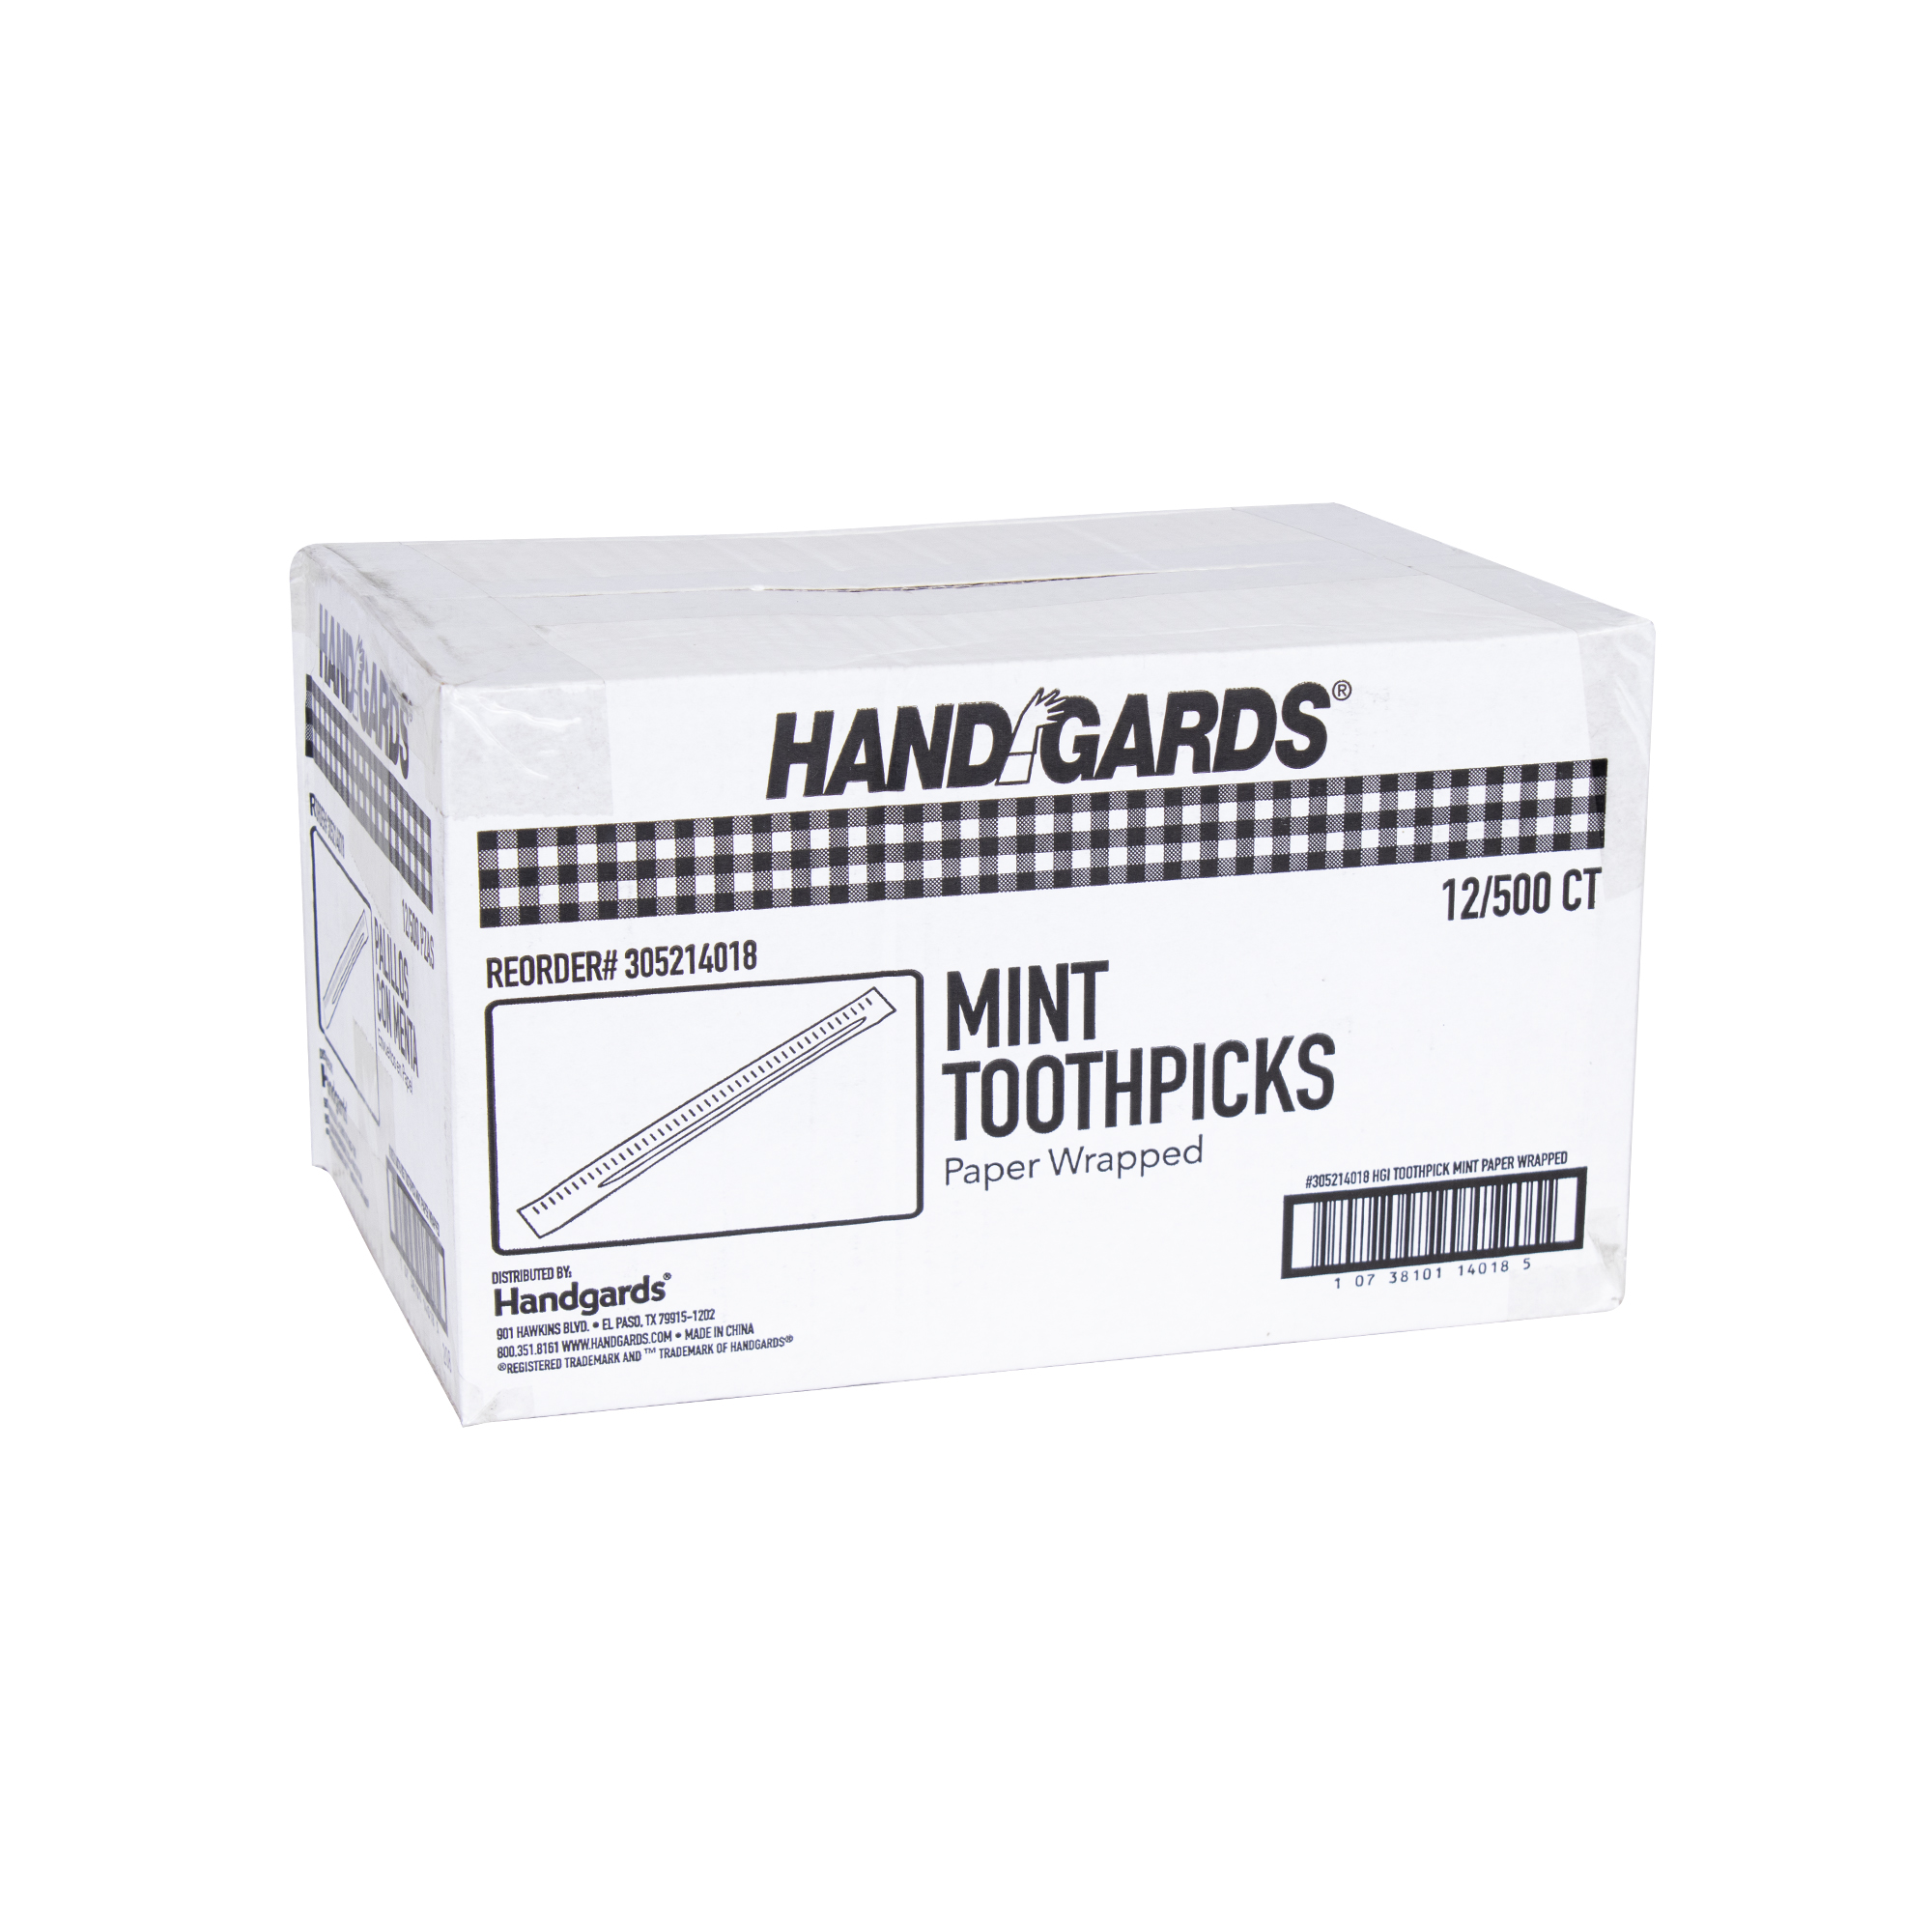 http://handgards.com/wp-content/uploads/2020/08/305214018-Handgards%C2%AE-Wood-Disposable-Round-Toothpicks-Mint-Flavor-Paper-Wrapped.jpg